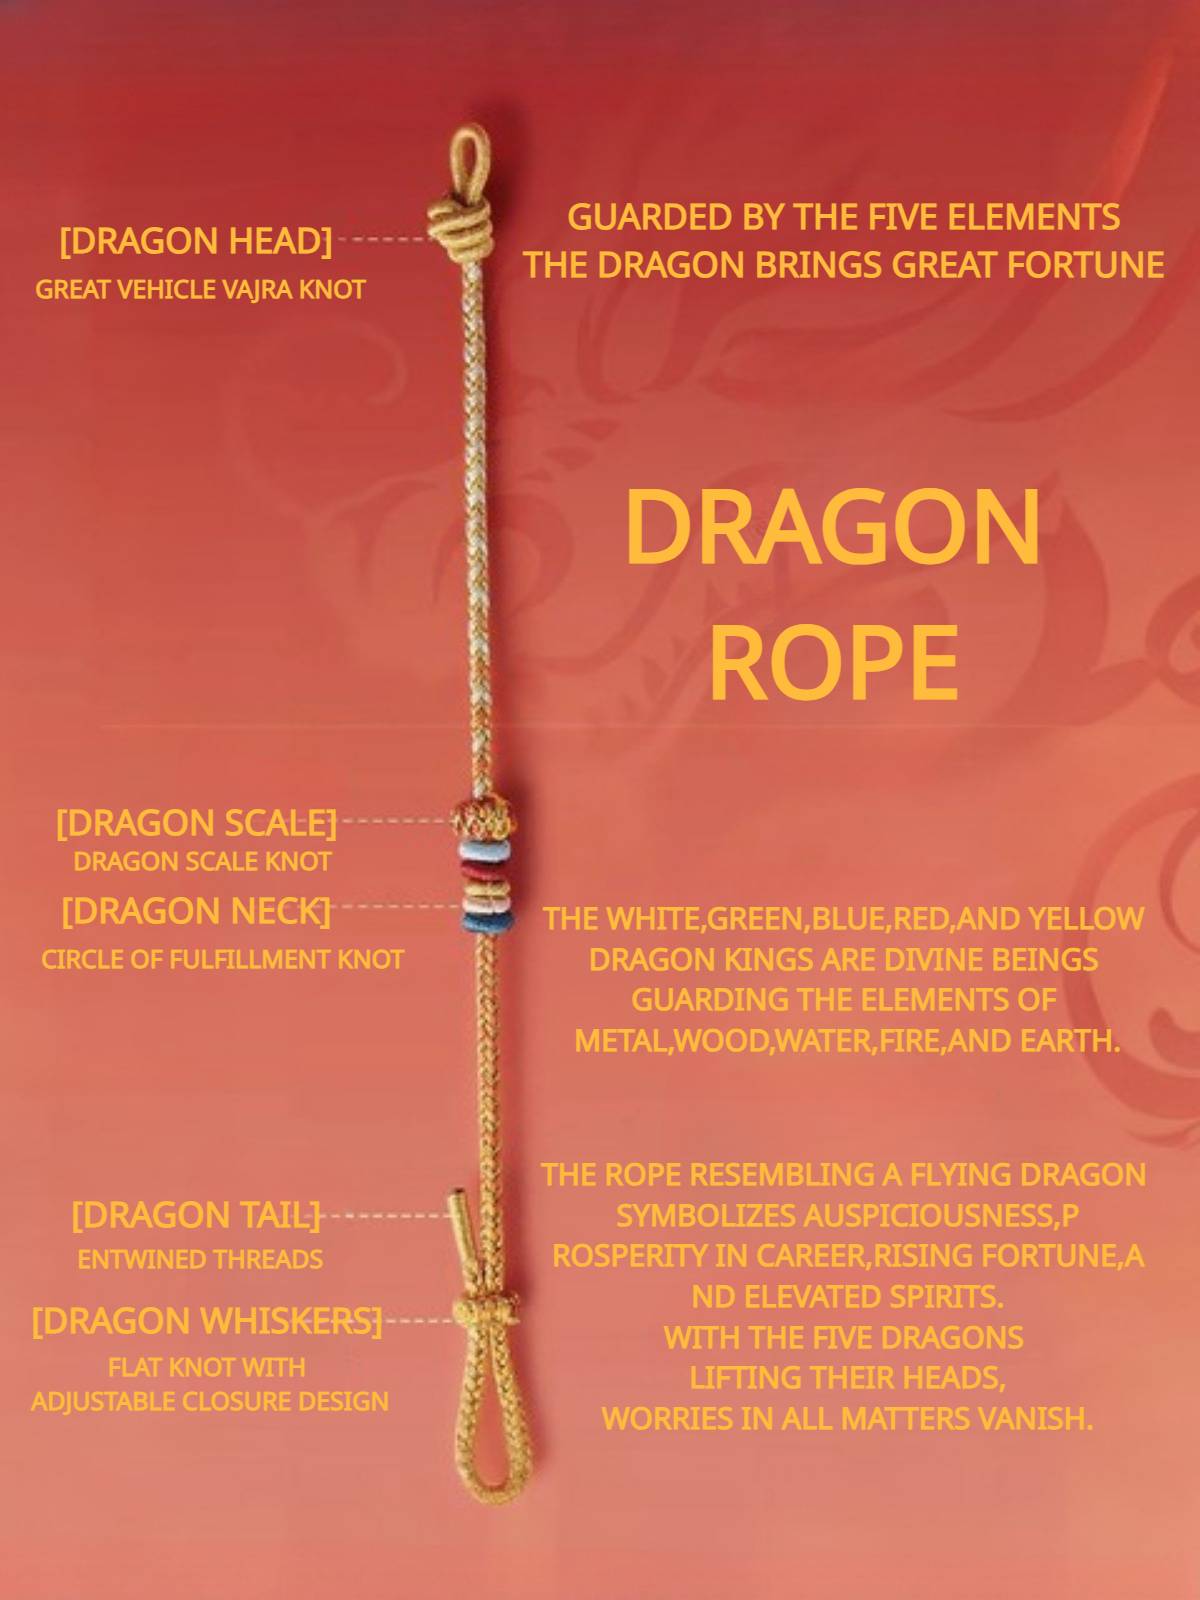 2024 Year of the Dragon Blessing Braided Bracelet for attracting good luck4